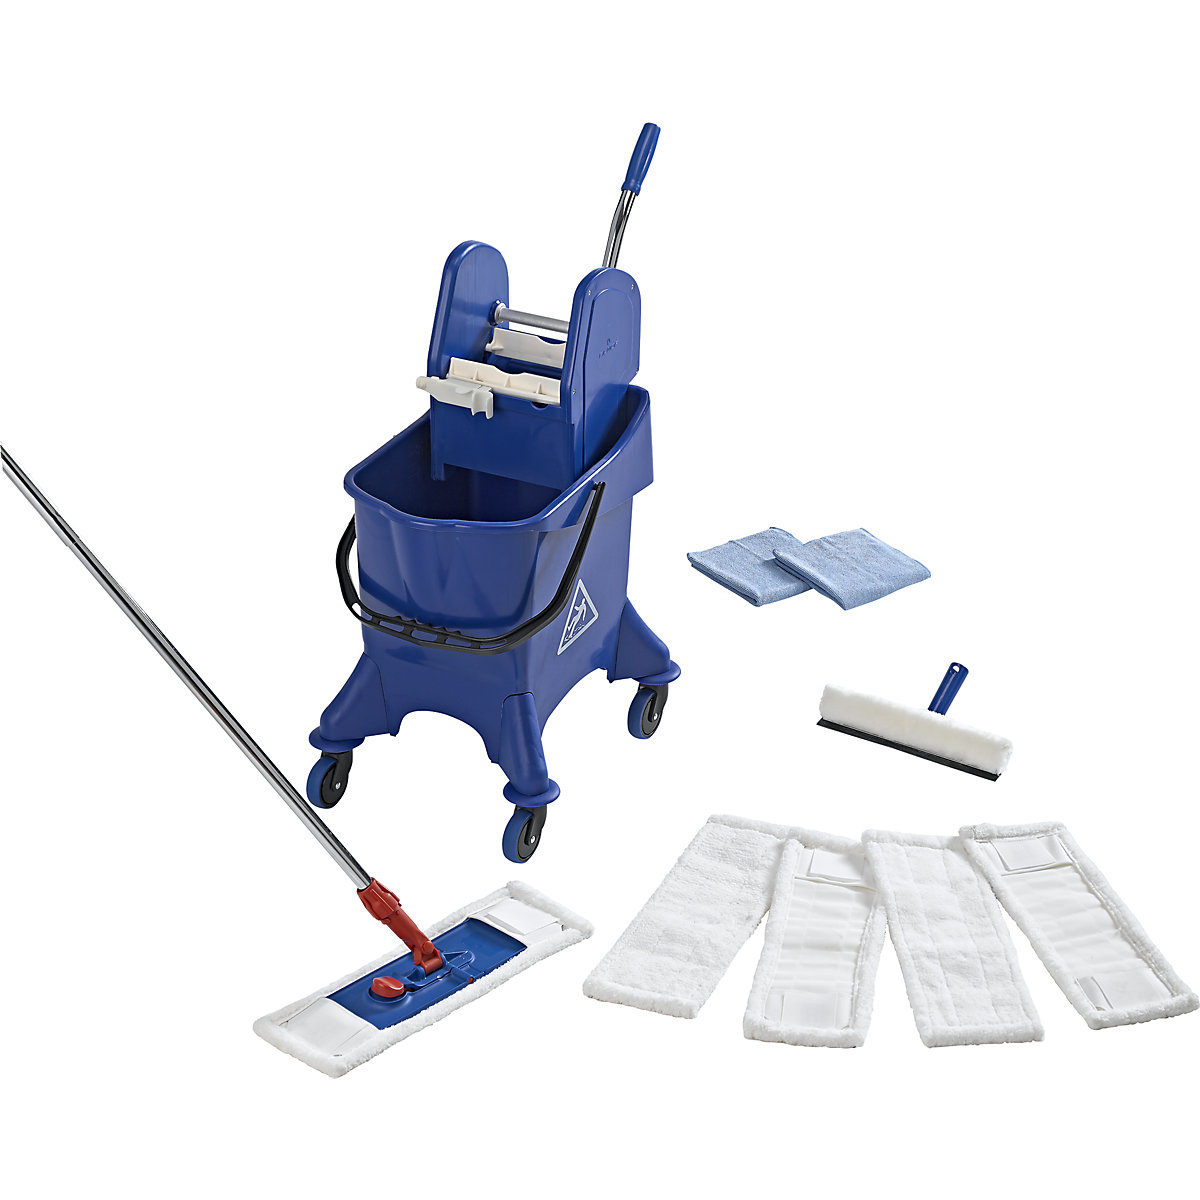 Professional cleaning set